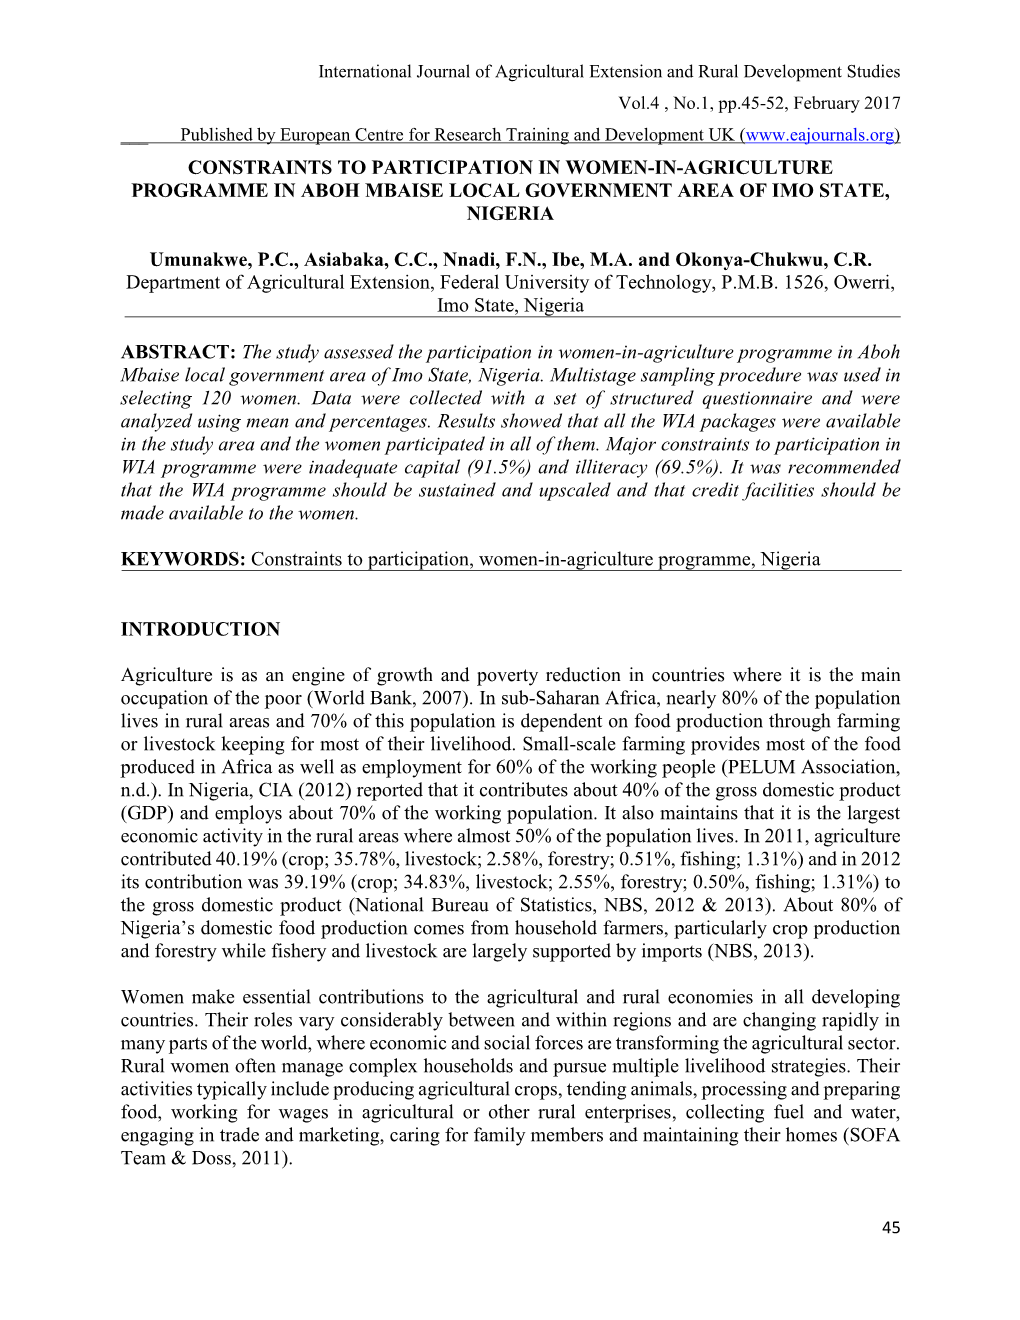 CONSTRAINTS to PARTICIPATION in WOMEN-IN-AGRICULTURE PROGRAMME in ABOH MBAISE LOCAL GOVERNMENT AREA of IMO STATE, NIGERIA Umunak